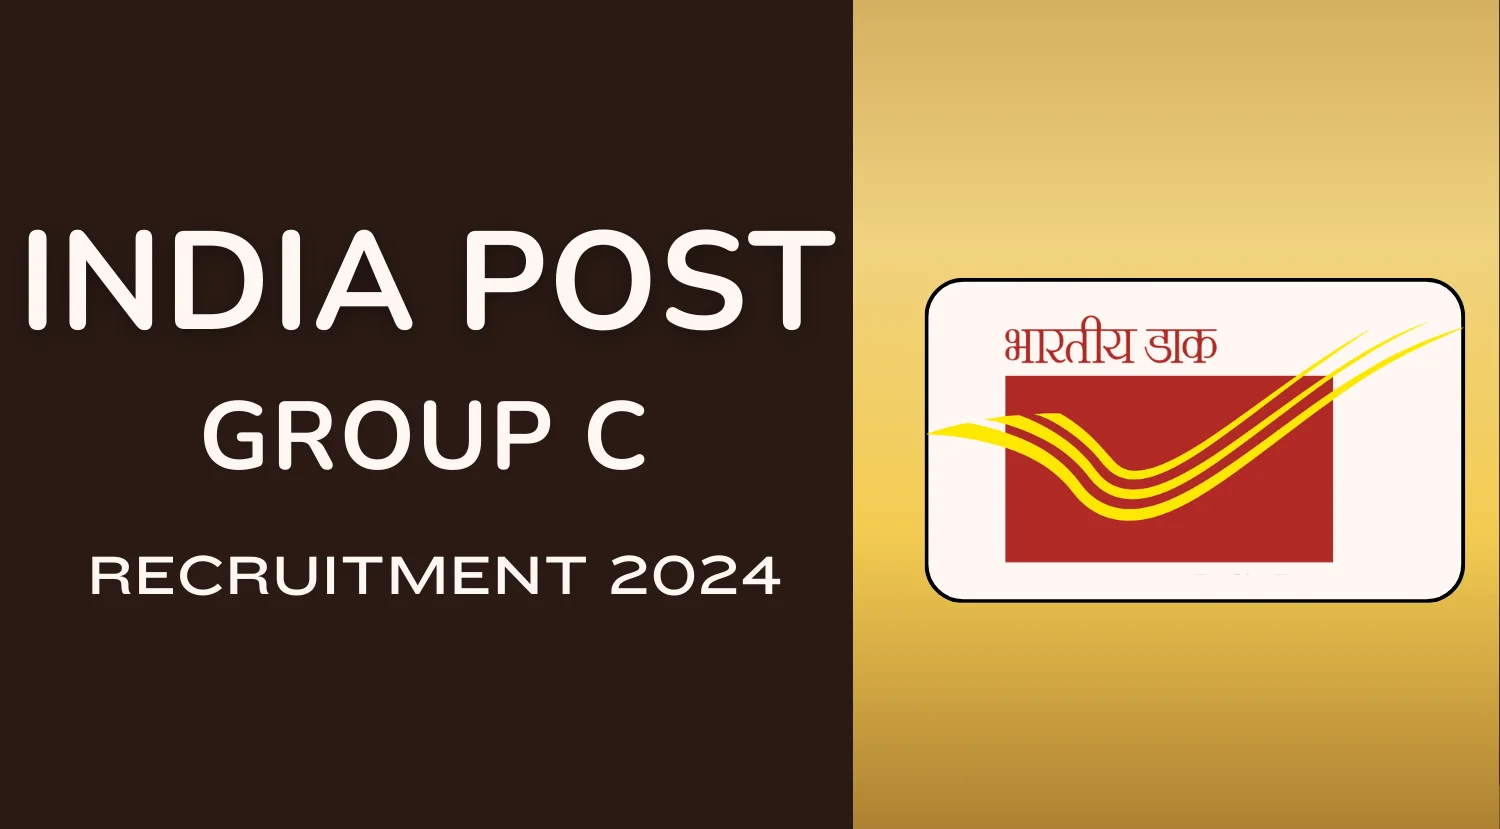 India Post Group C Driver Recruitment 2024